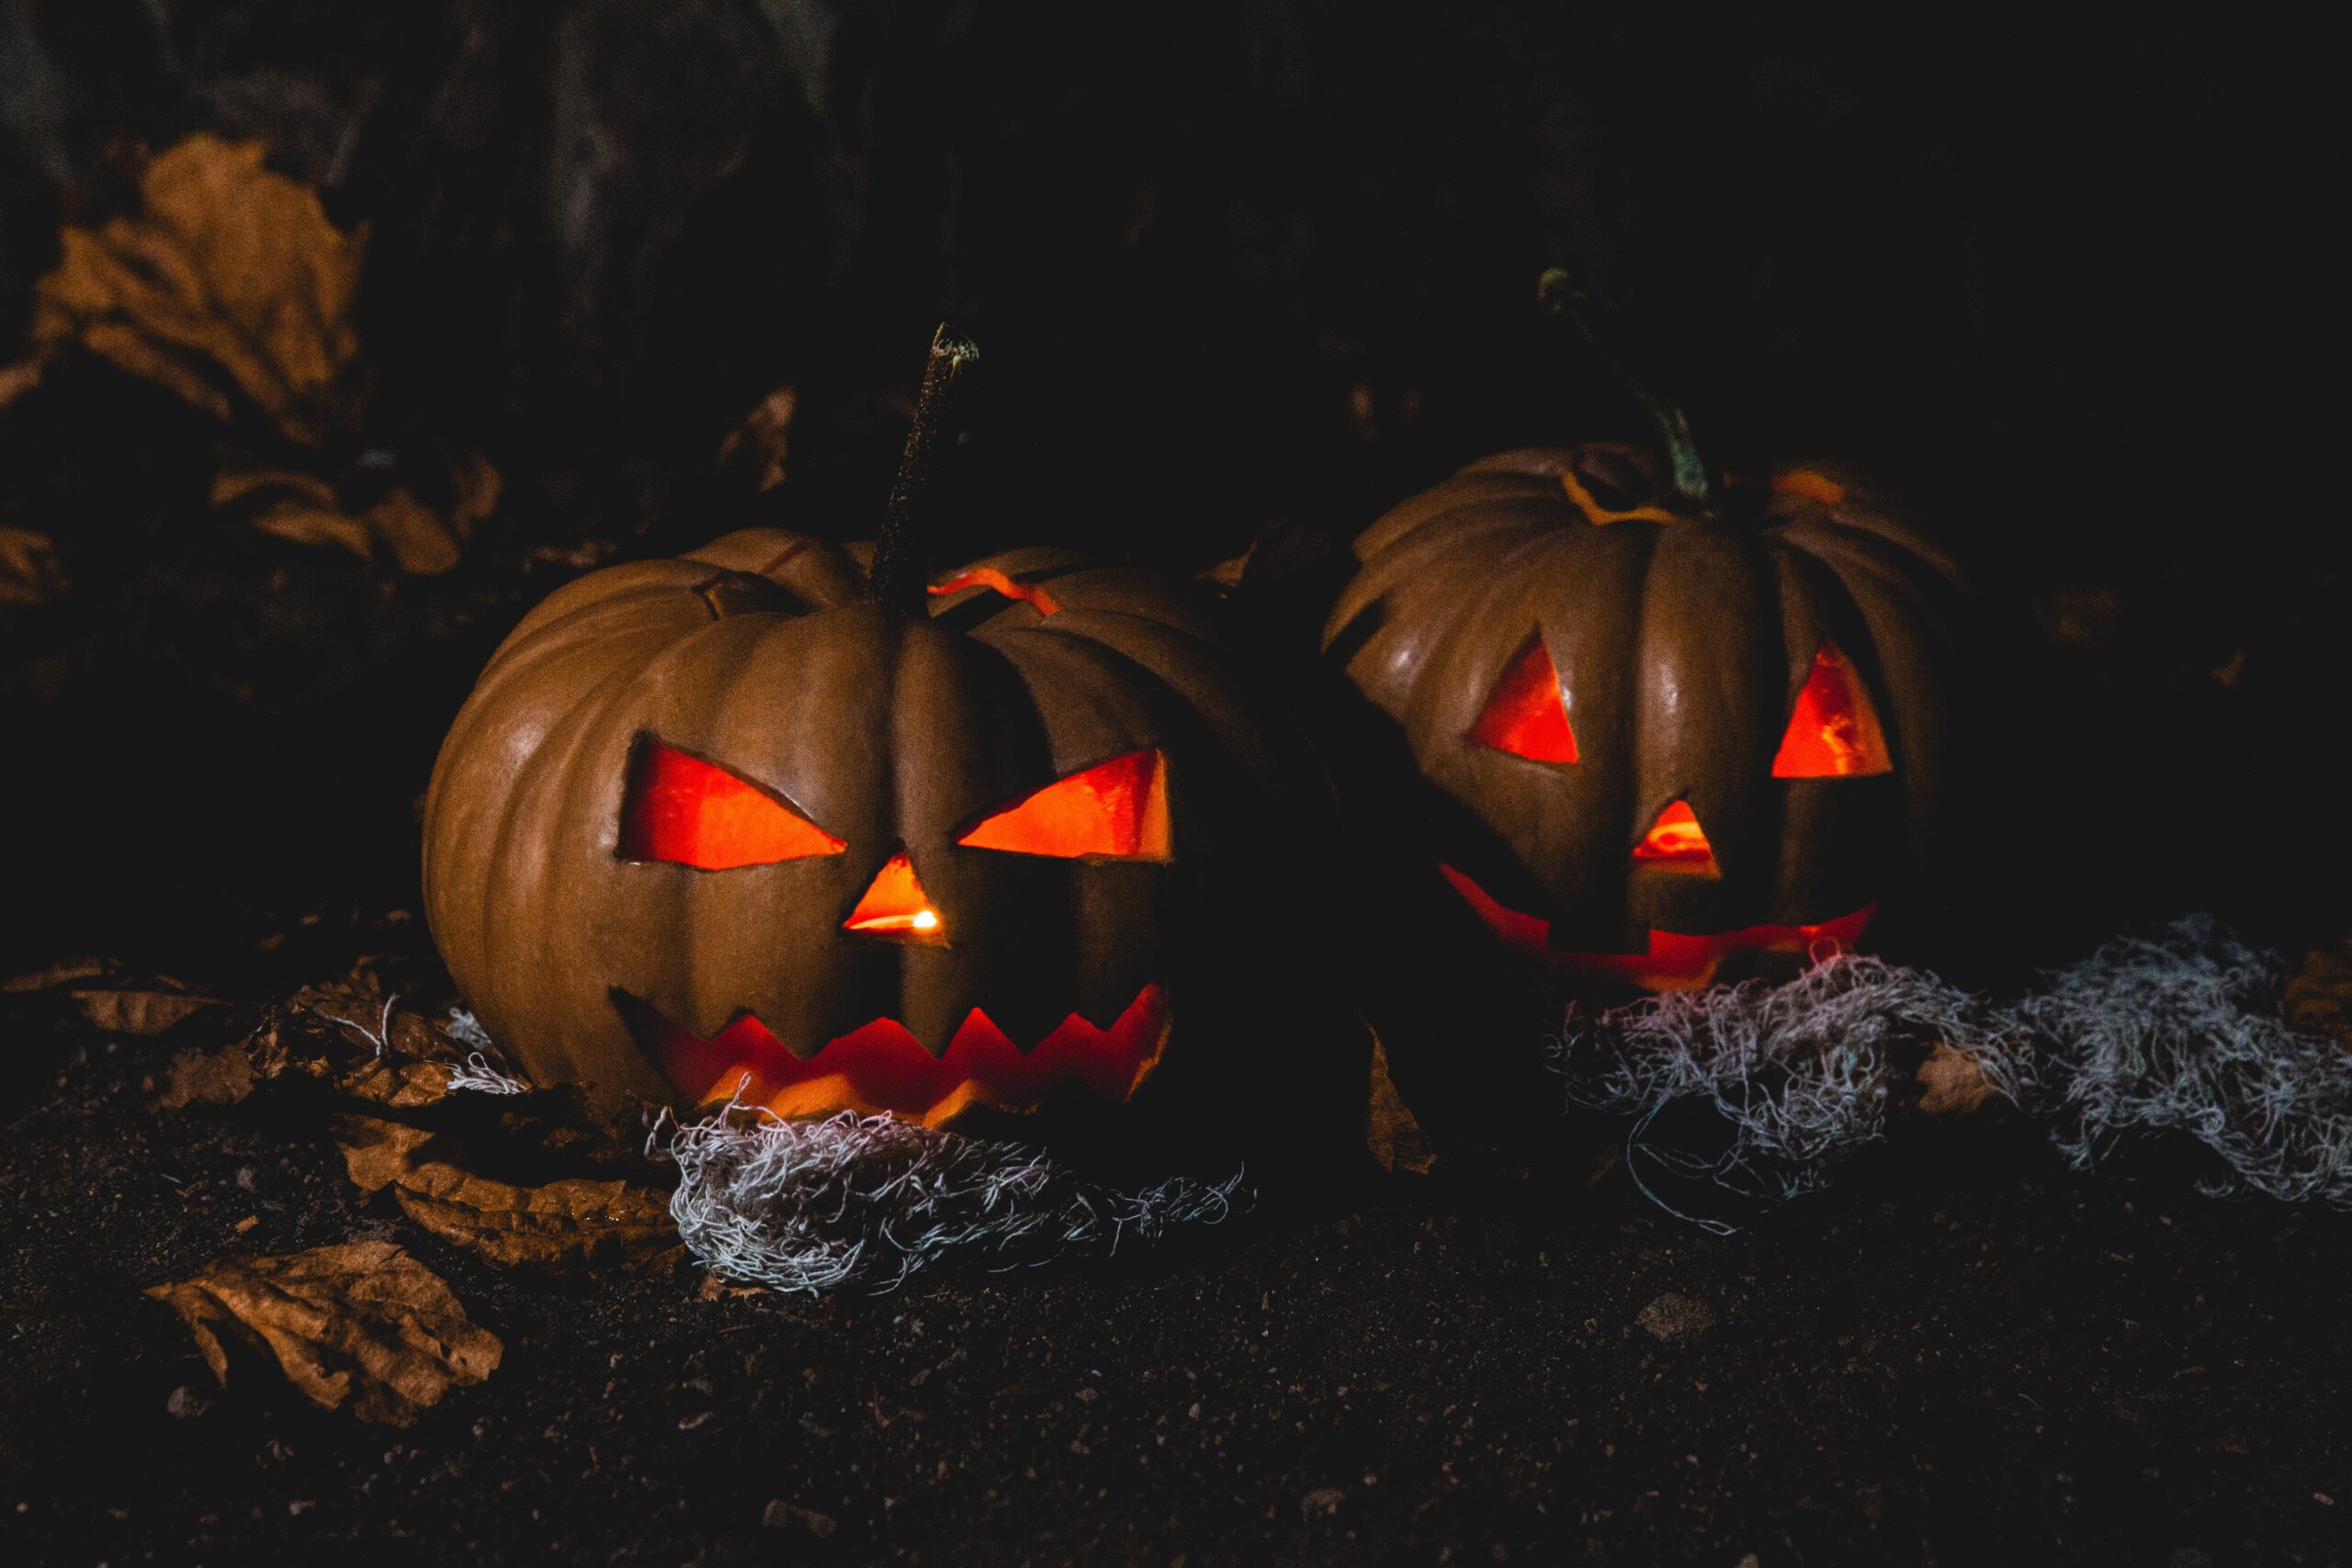 10 interesting events you should attend this Halloween in New Jersey